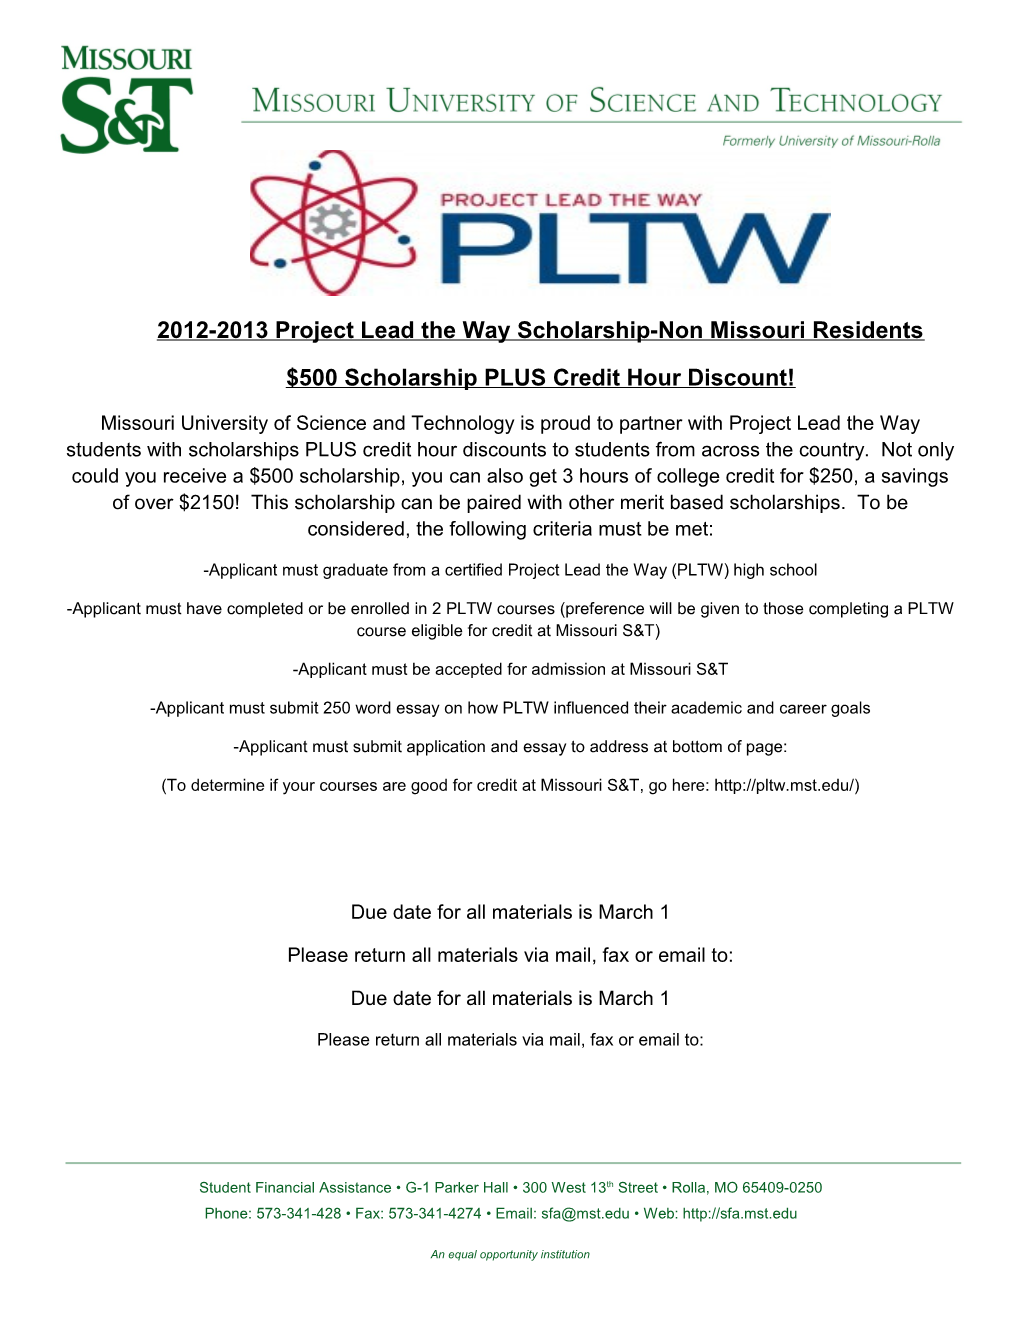 2012-2013 Project Lead the Way Scholarship-Non Missouri Residents